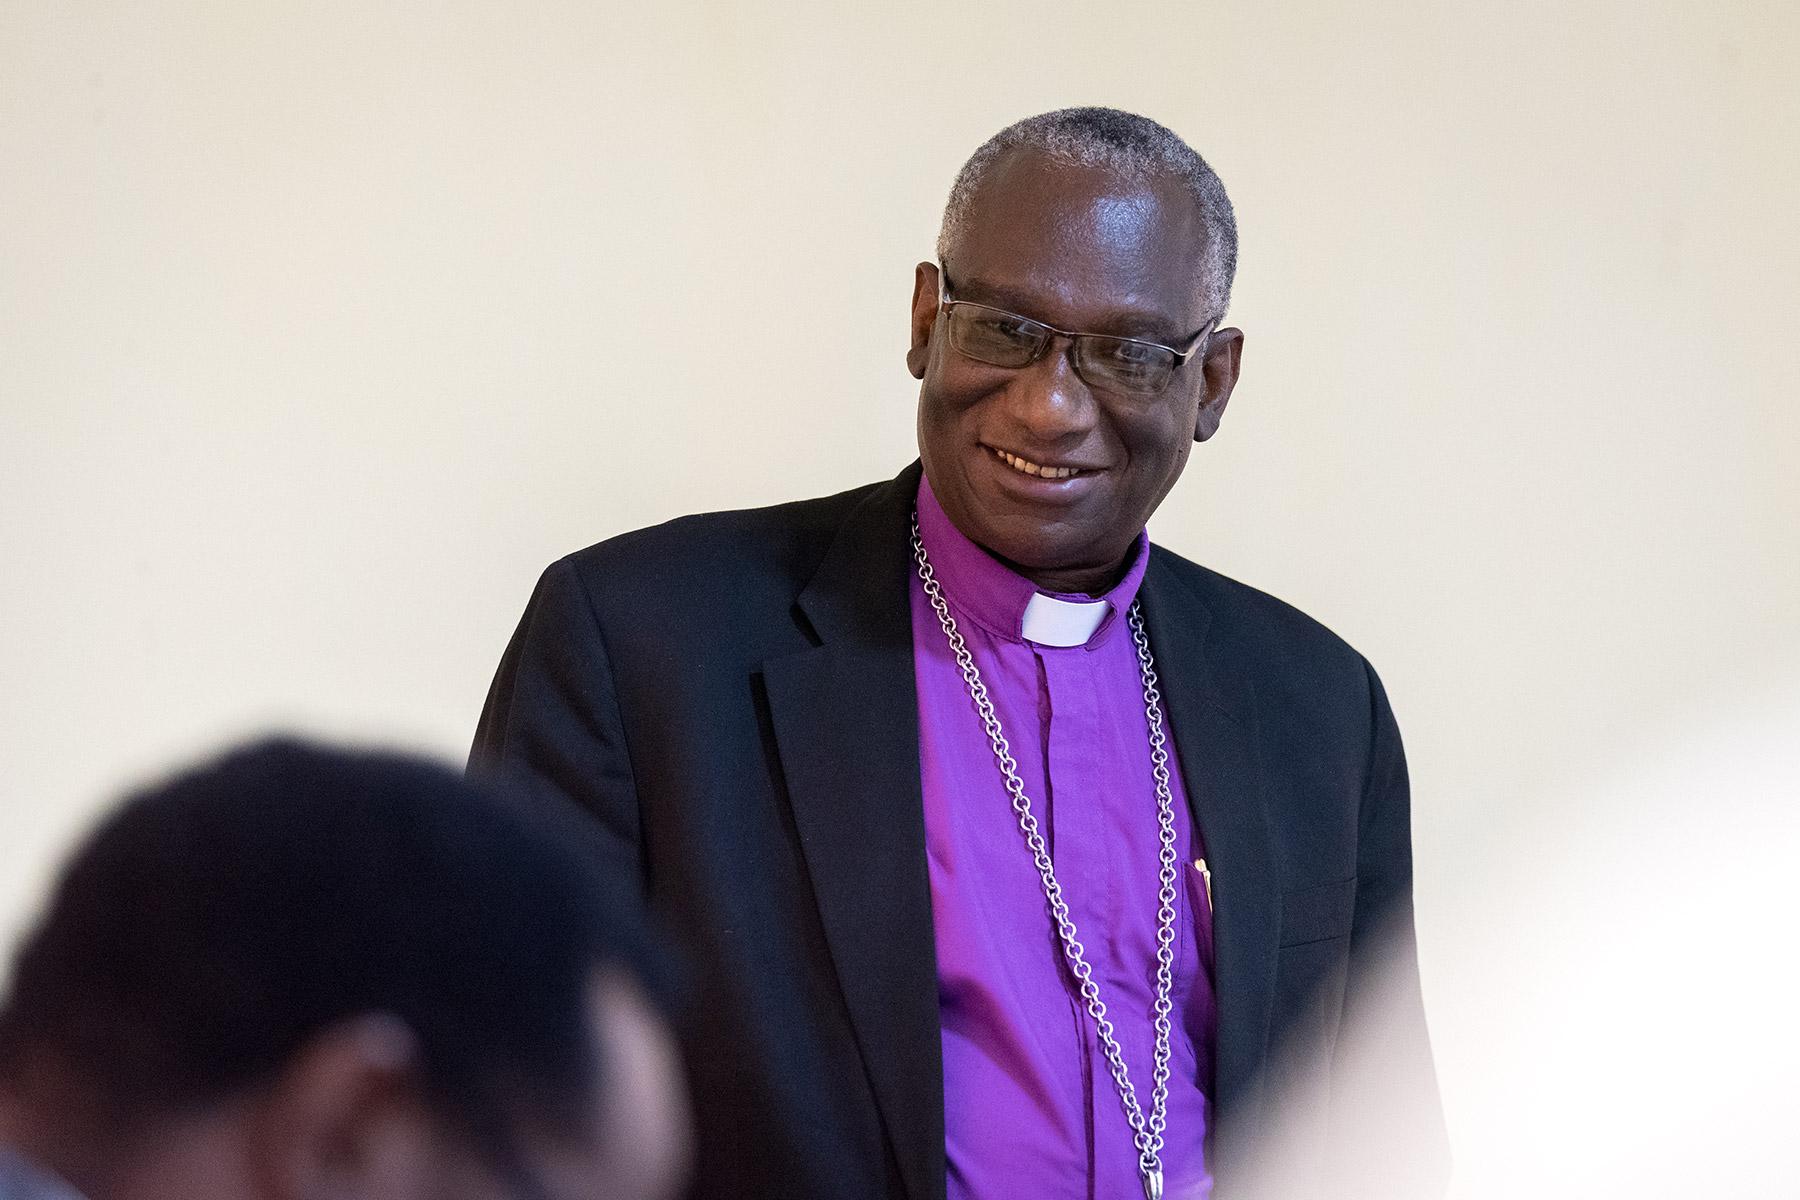 Bishop Fredrick Onael Shoo from the Evangelical Lutheran Church in Tanzania’s (ELCT) Northern Diocese. Photo: LWF/Albin Hillert